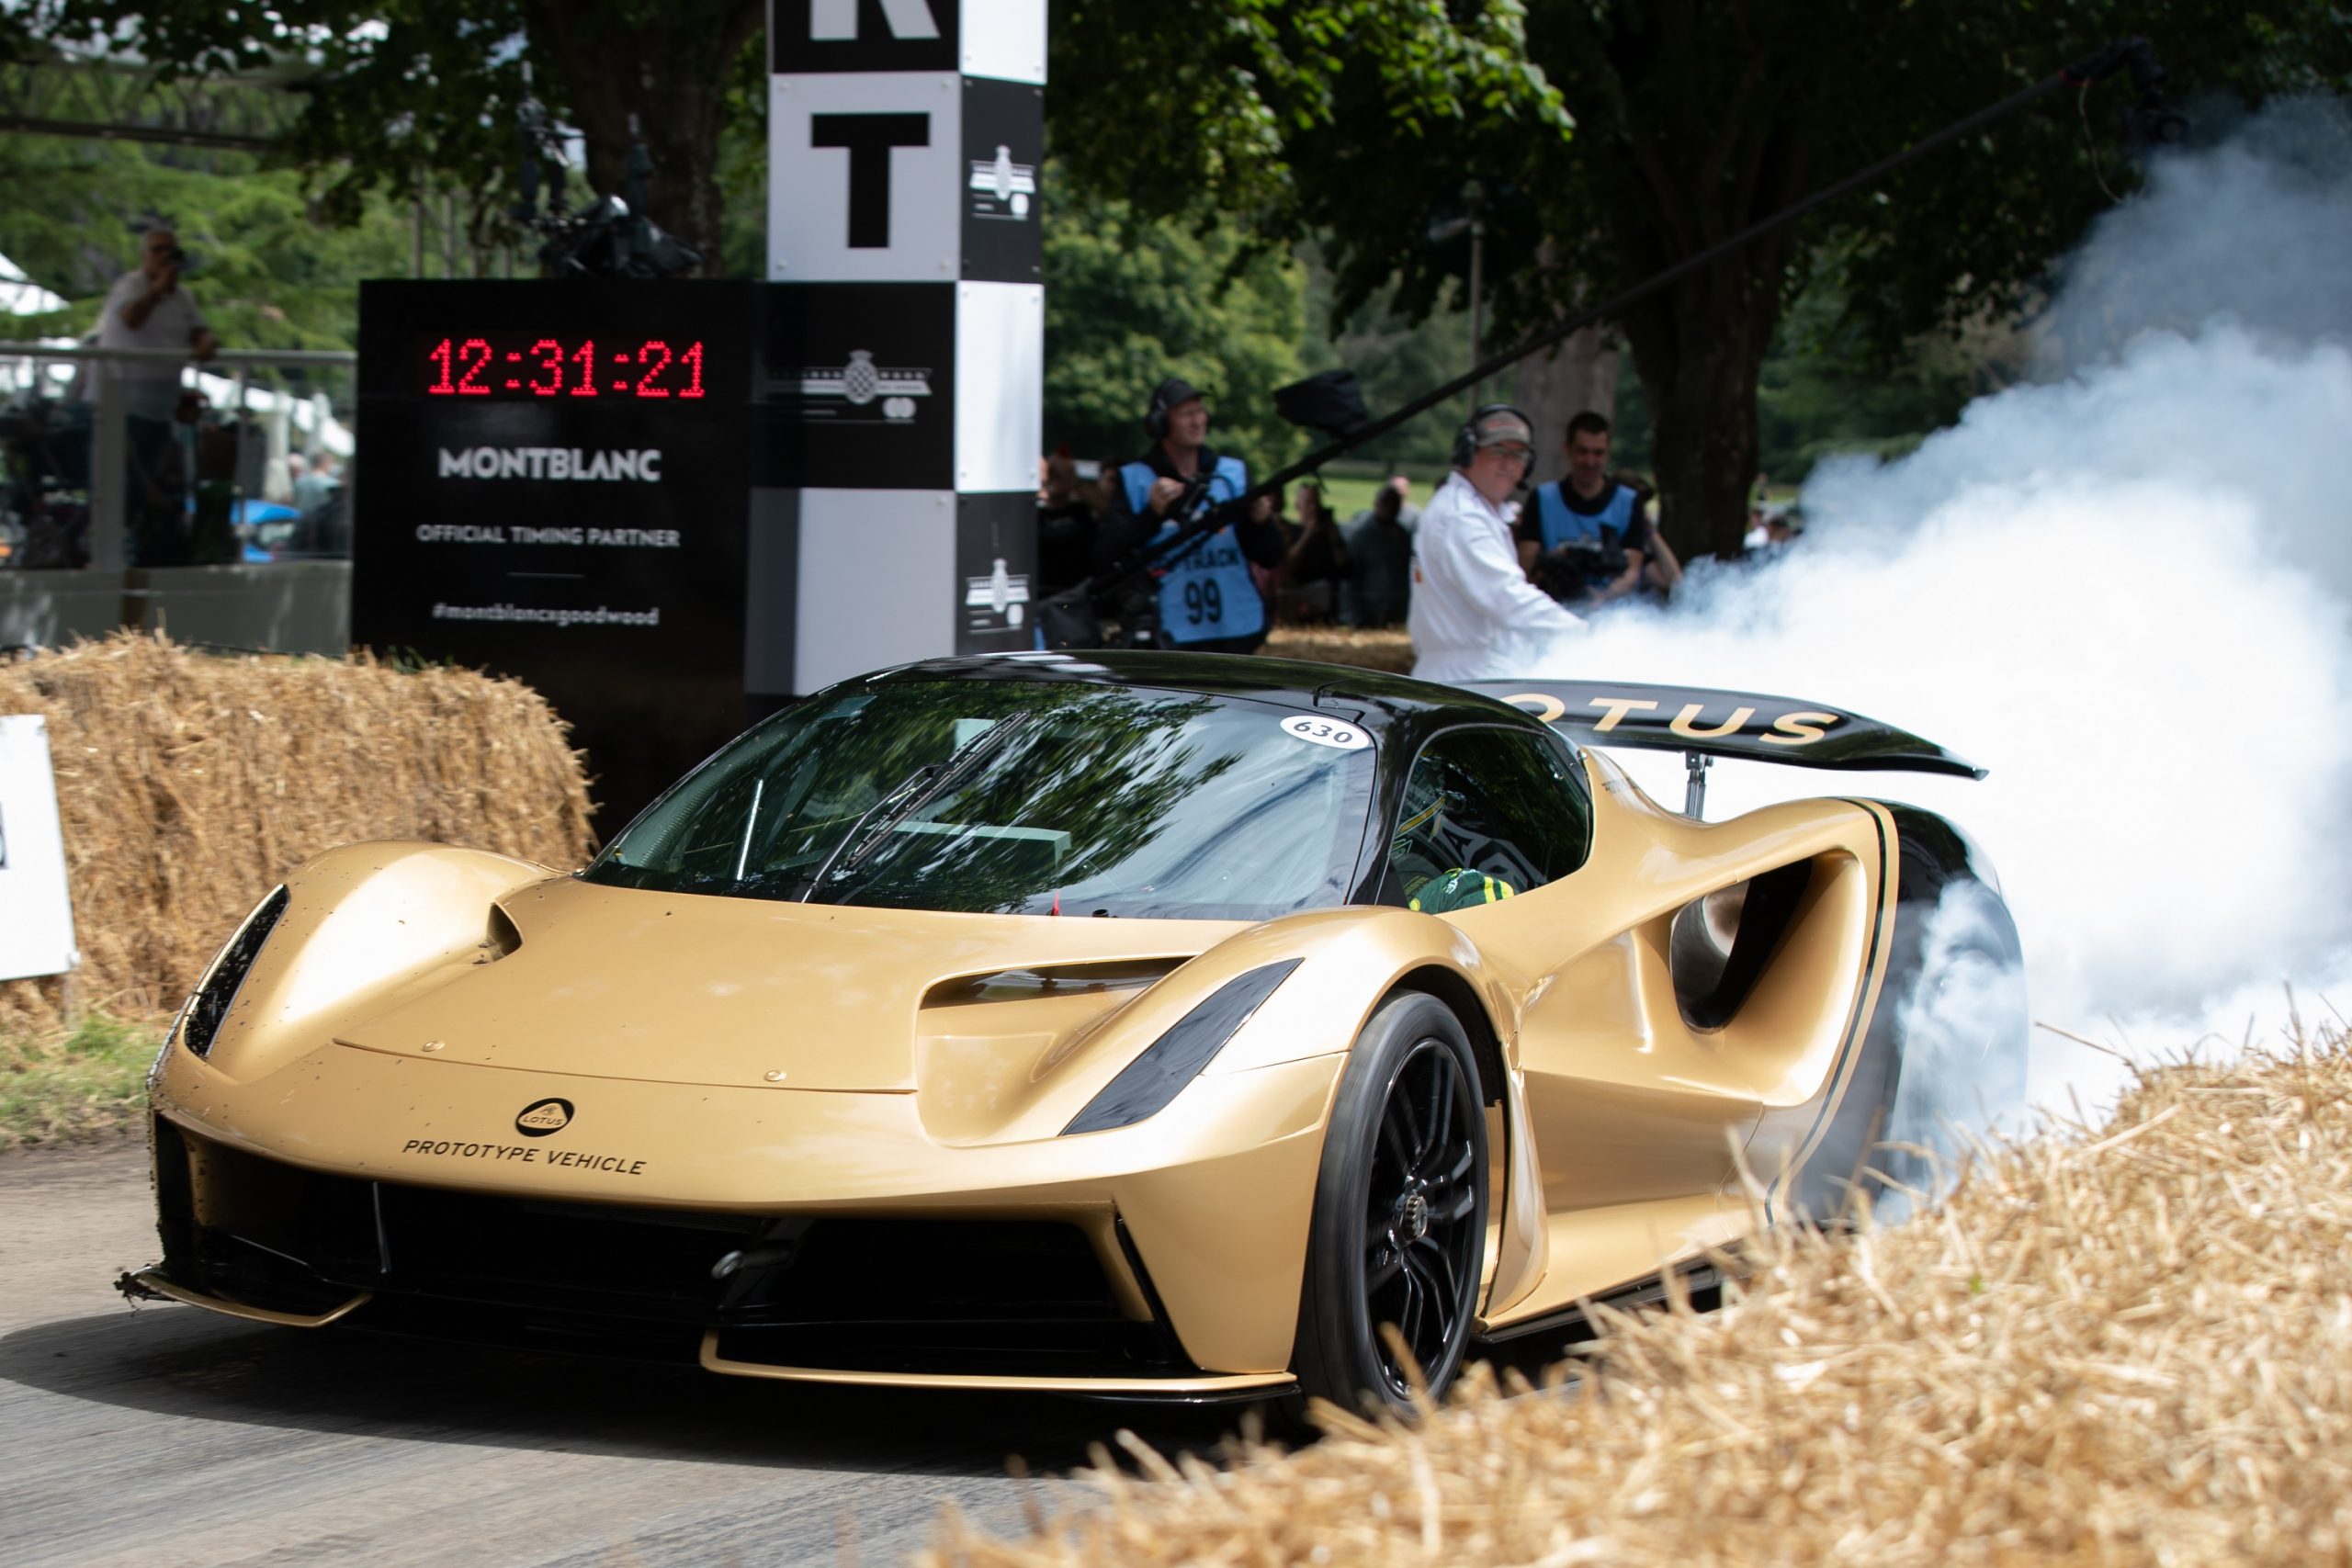 A gold Lotus Evija does a burnout at the start of its lap at the Goodwood Festival of Speed, shot from the front 3/4